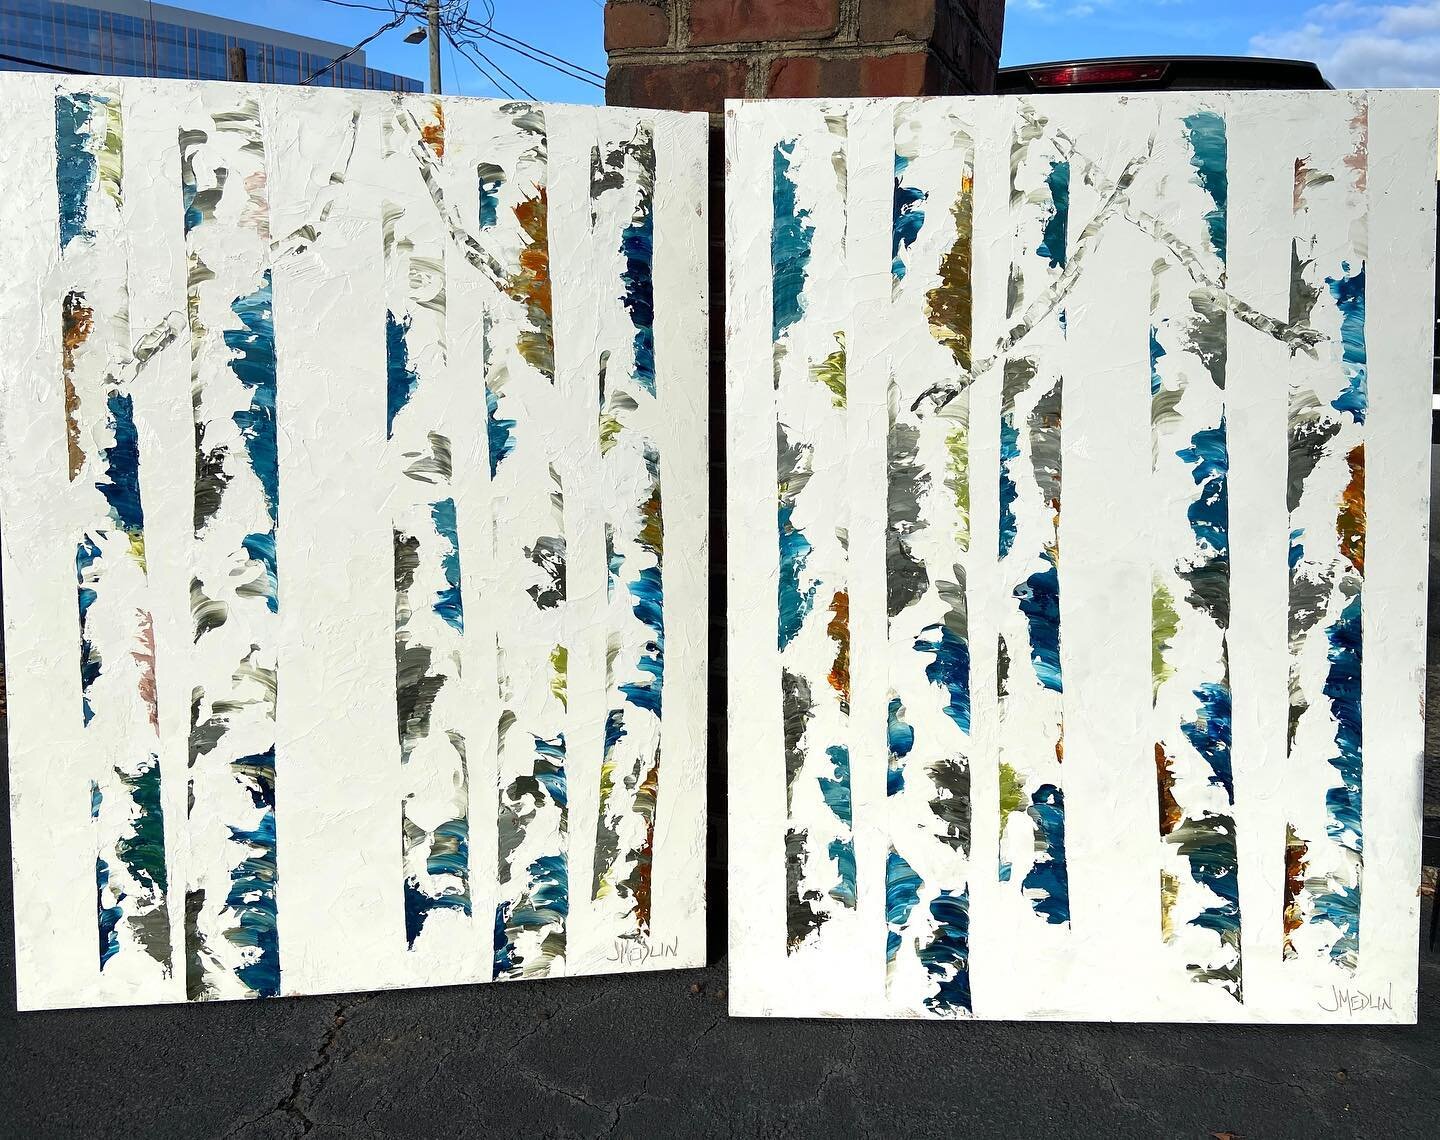 Went with more color in these&hellip;. Hard to stay away!30x40 each, Oil on Cradled Birch panels. 
Drying, but available soon. 

#aspentreepainting #birchtreepainting #whitetrees #janinemedlinfineart #dilworthartisanstation #southendclt #southendchar